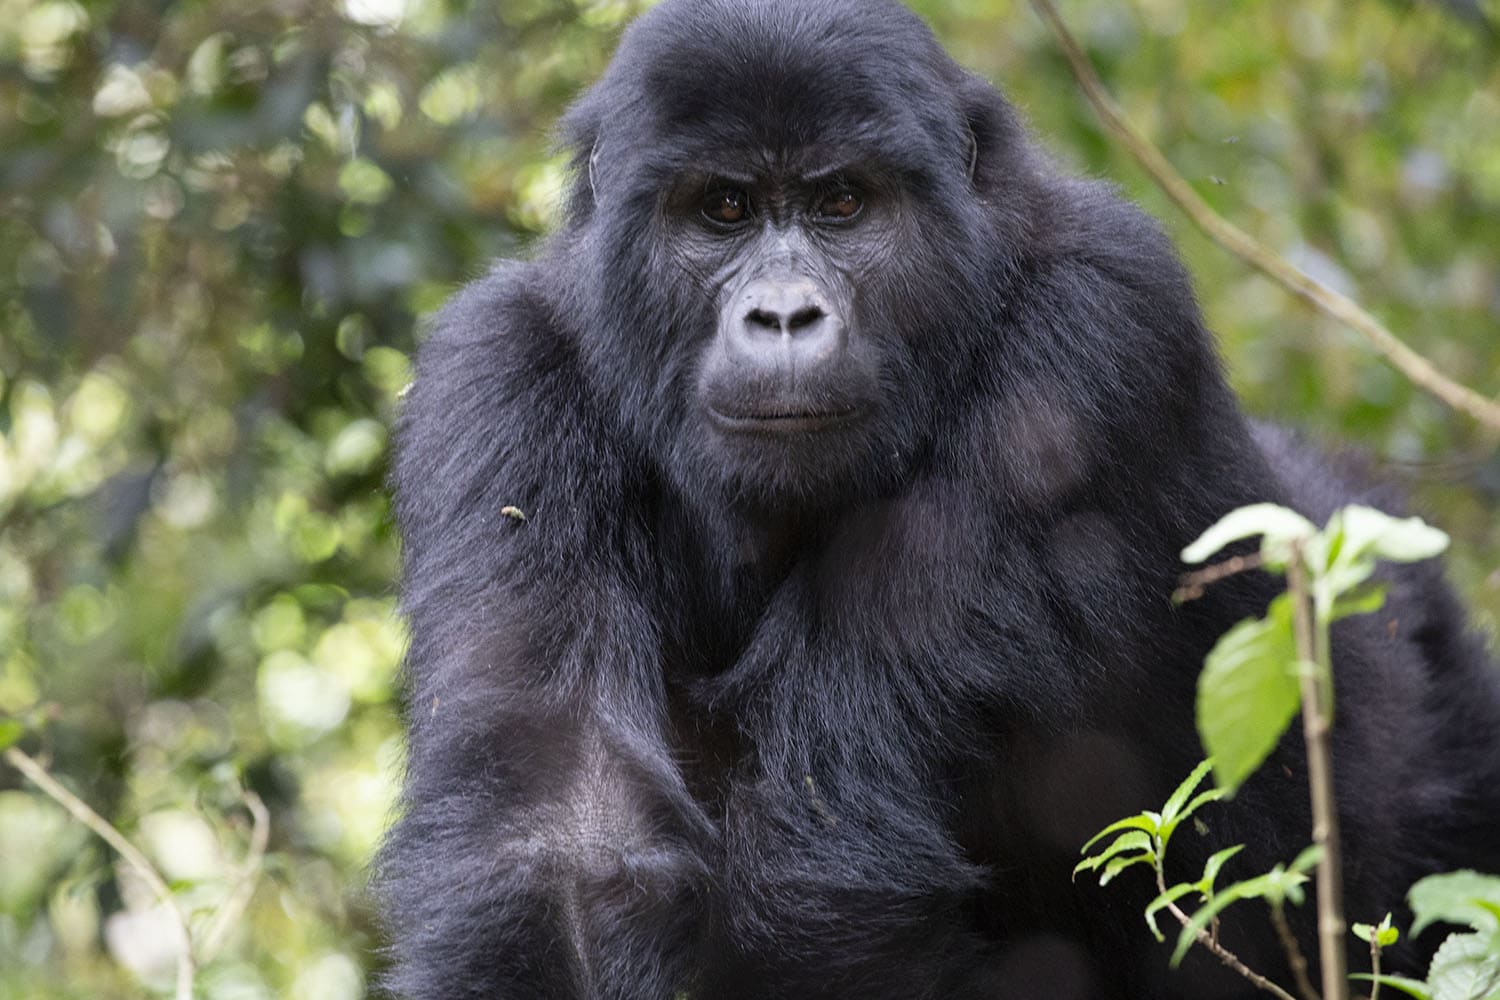 Tracking mountain gorillas is an experience of a lifetime